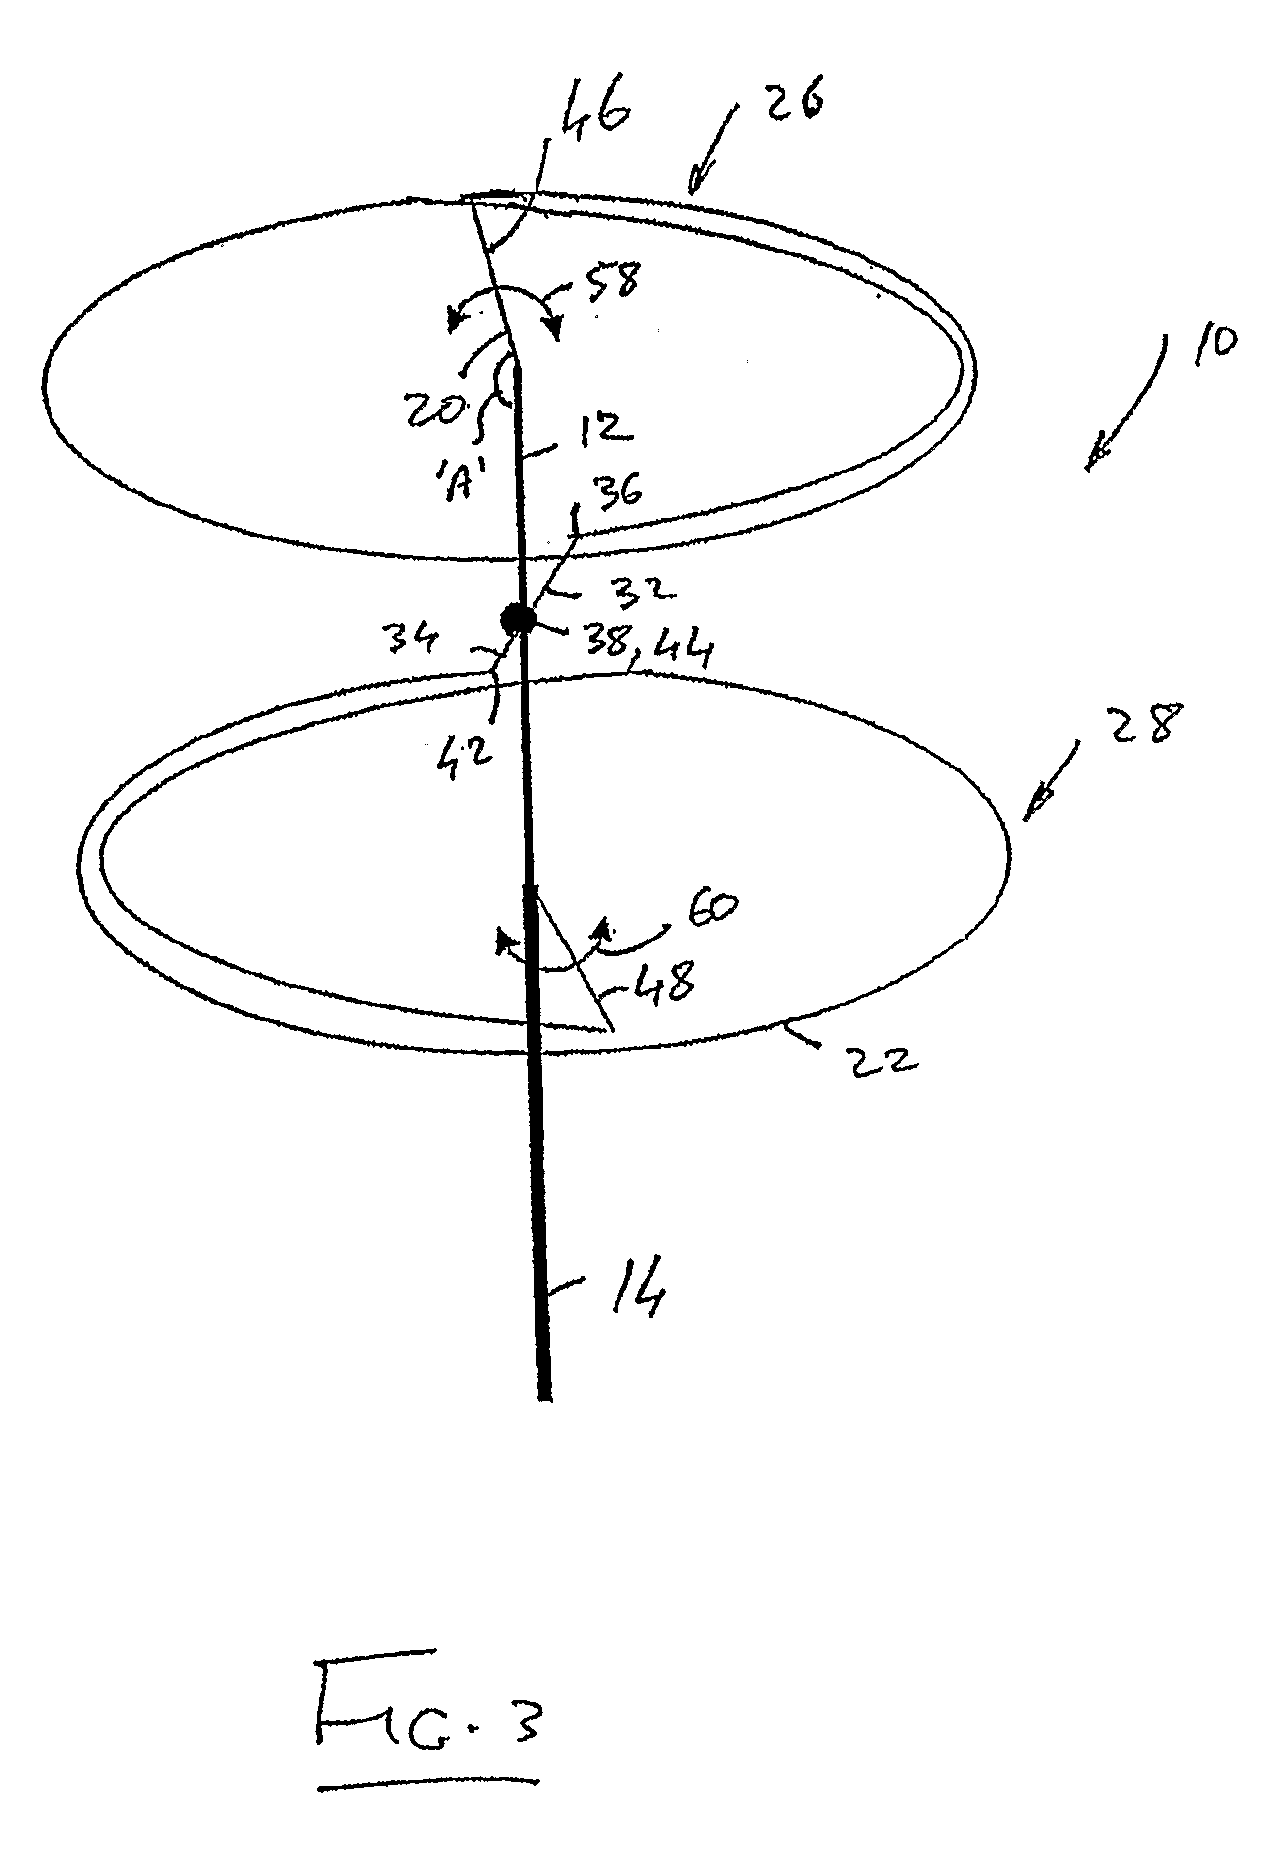 Catheter Assembly With an Adjustable Loop